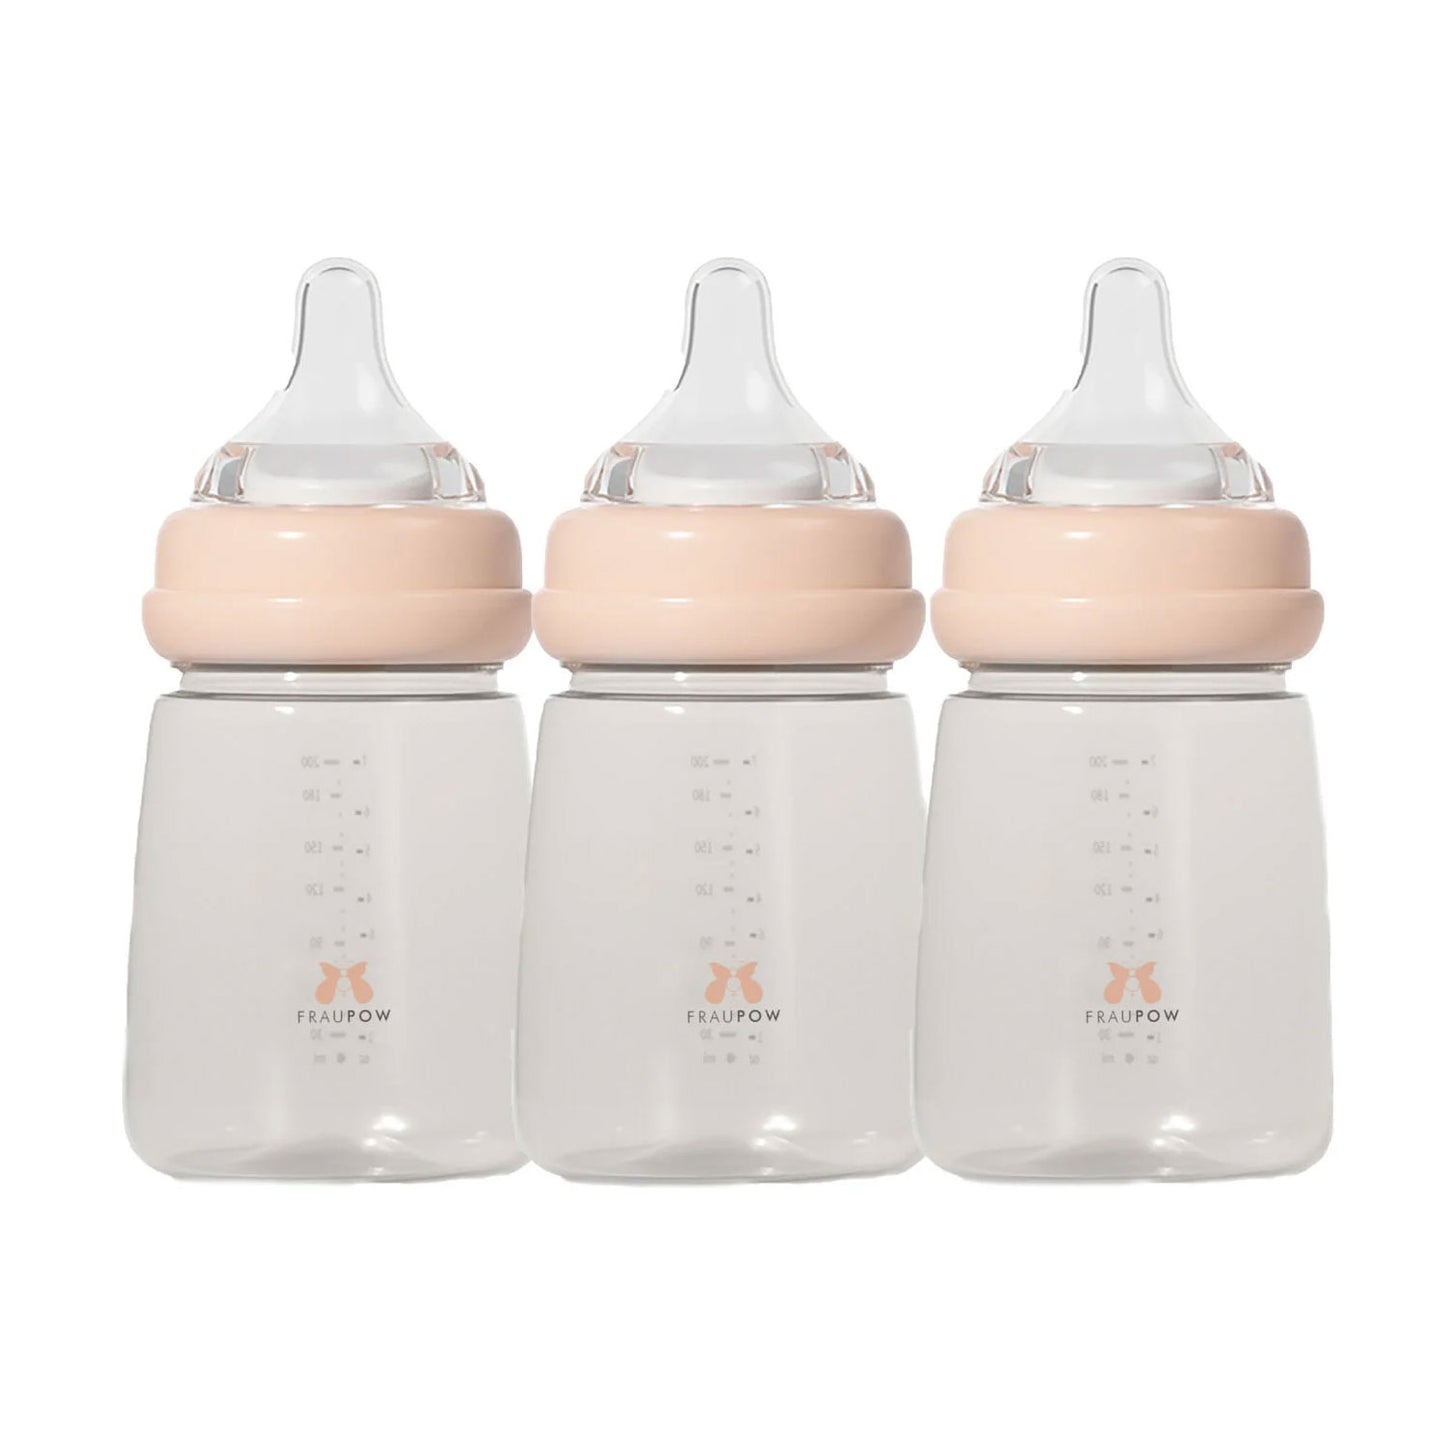 Large capacity pack of 3 milk storage & feeding bottles. Each bottle holds 200ml liquid and comes with either a feeding teat or secure lid;